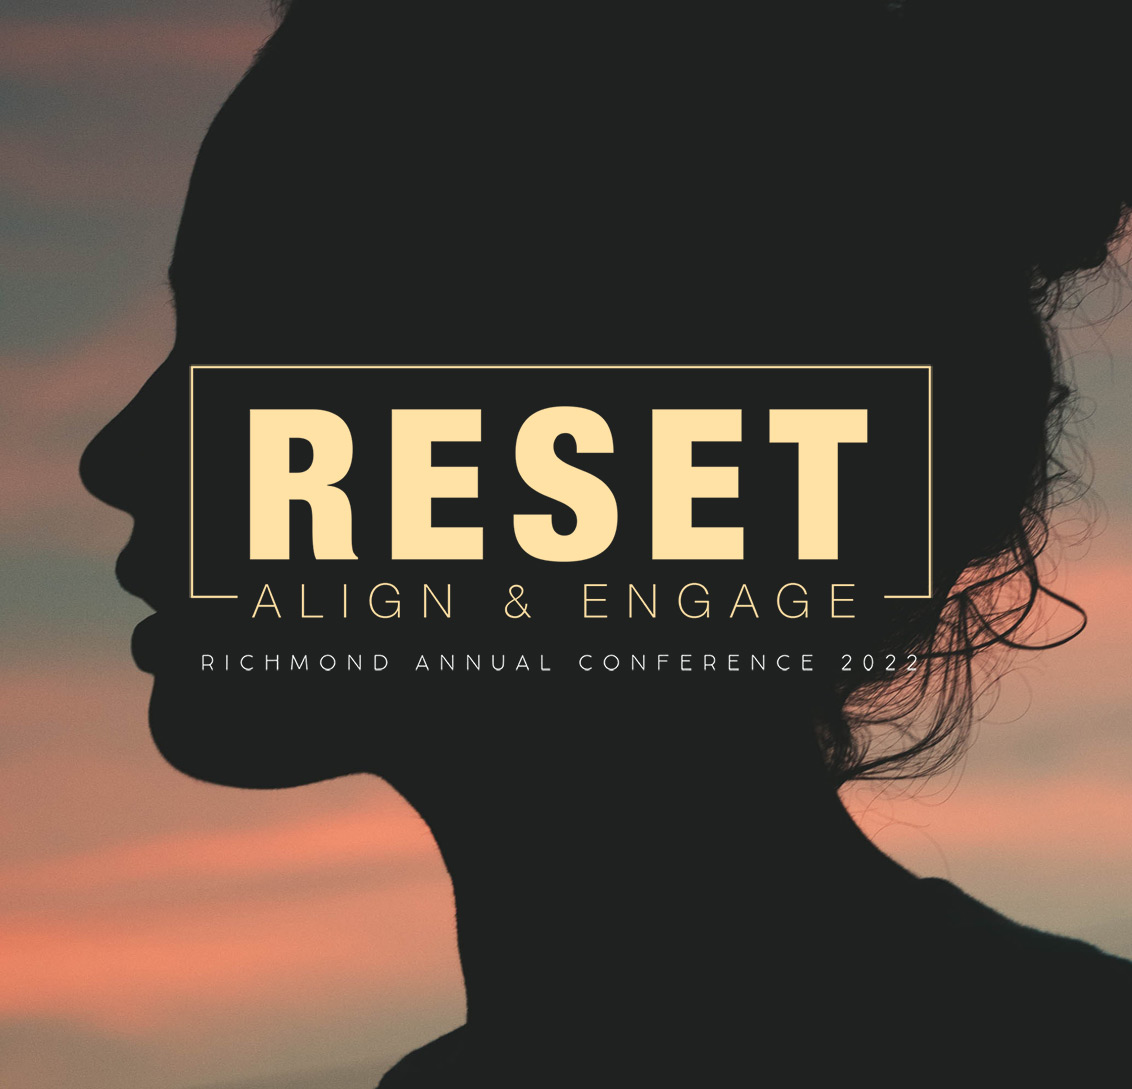 RESET: Align & Engage – Richmond Foundation Annual Conference 2022